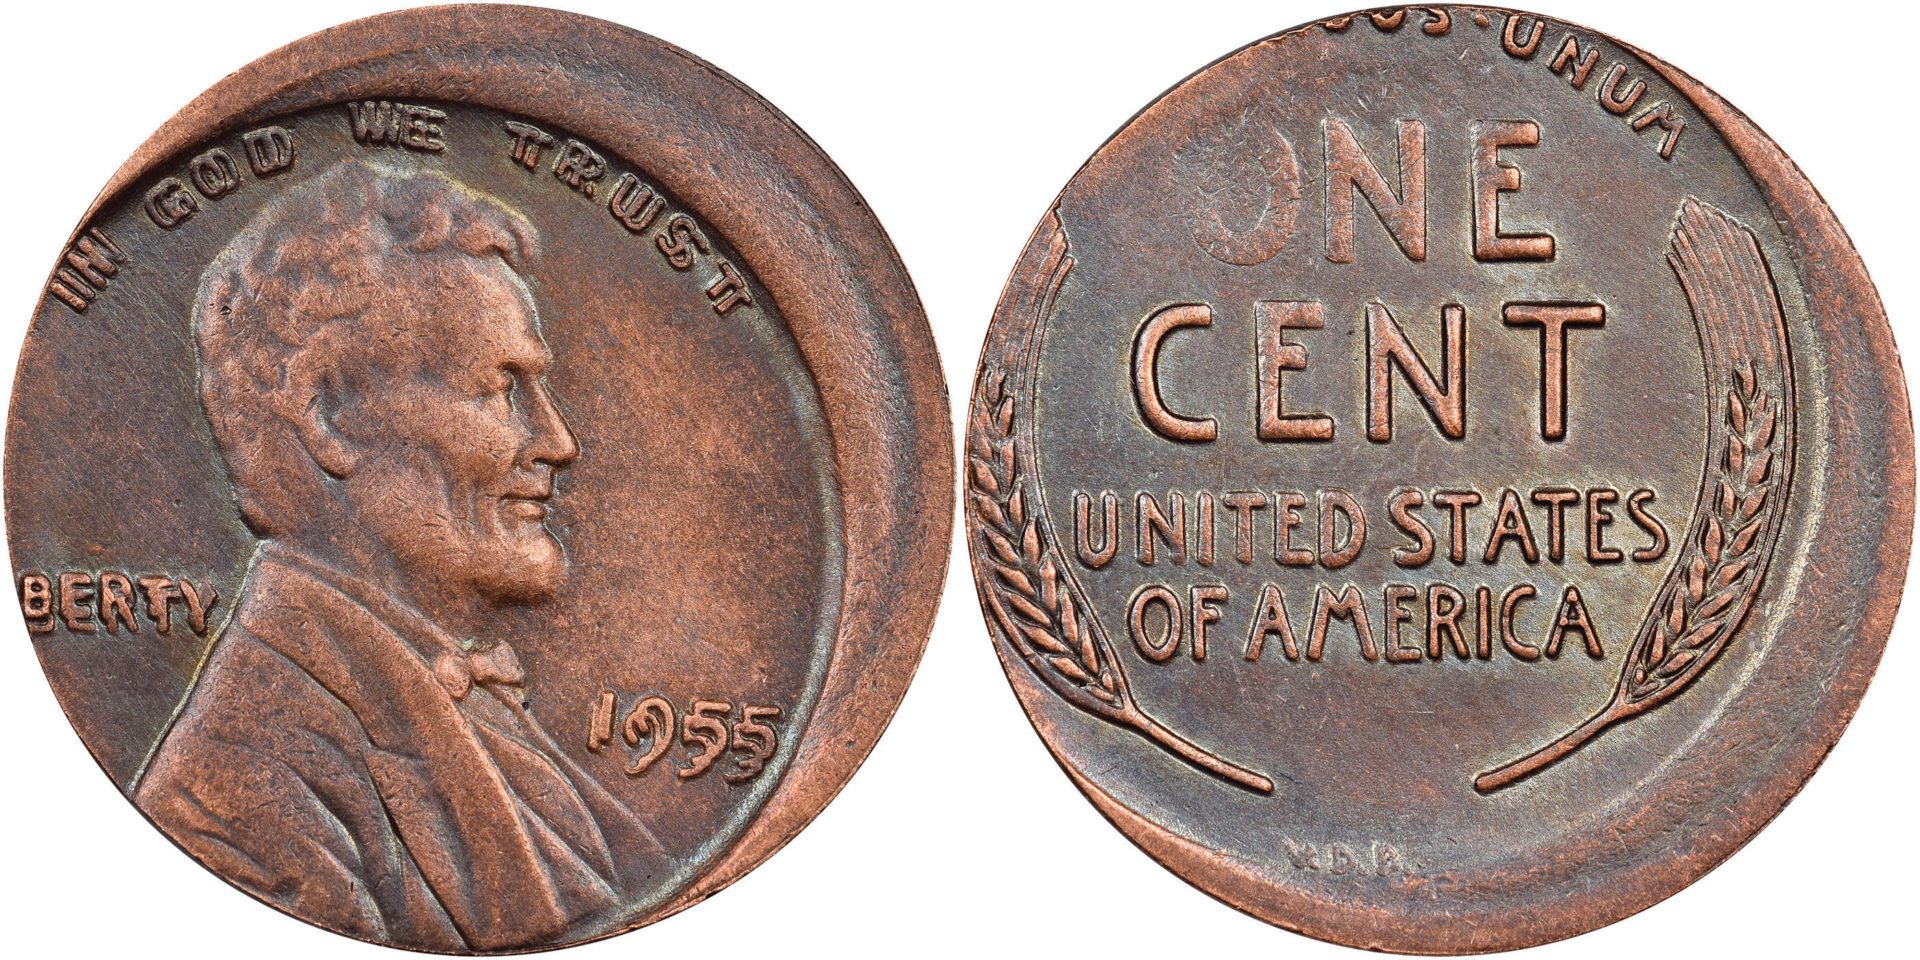 Counterfeit 1955 Lincoln cent with doubled-die obverse